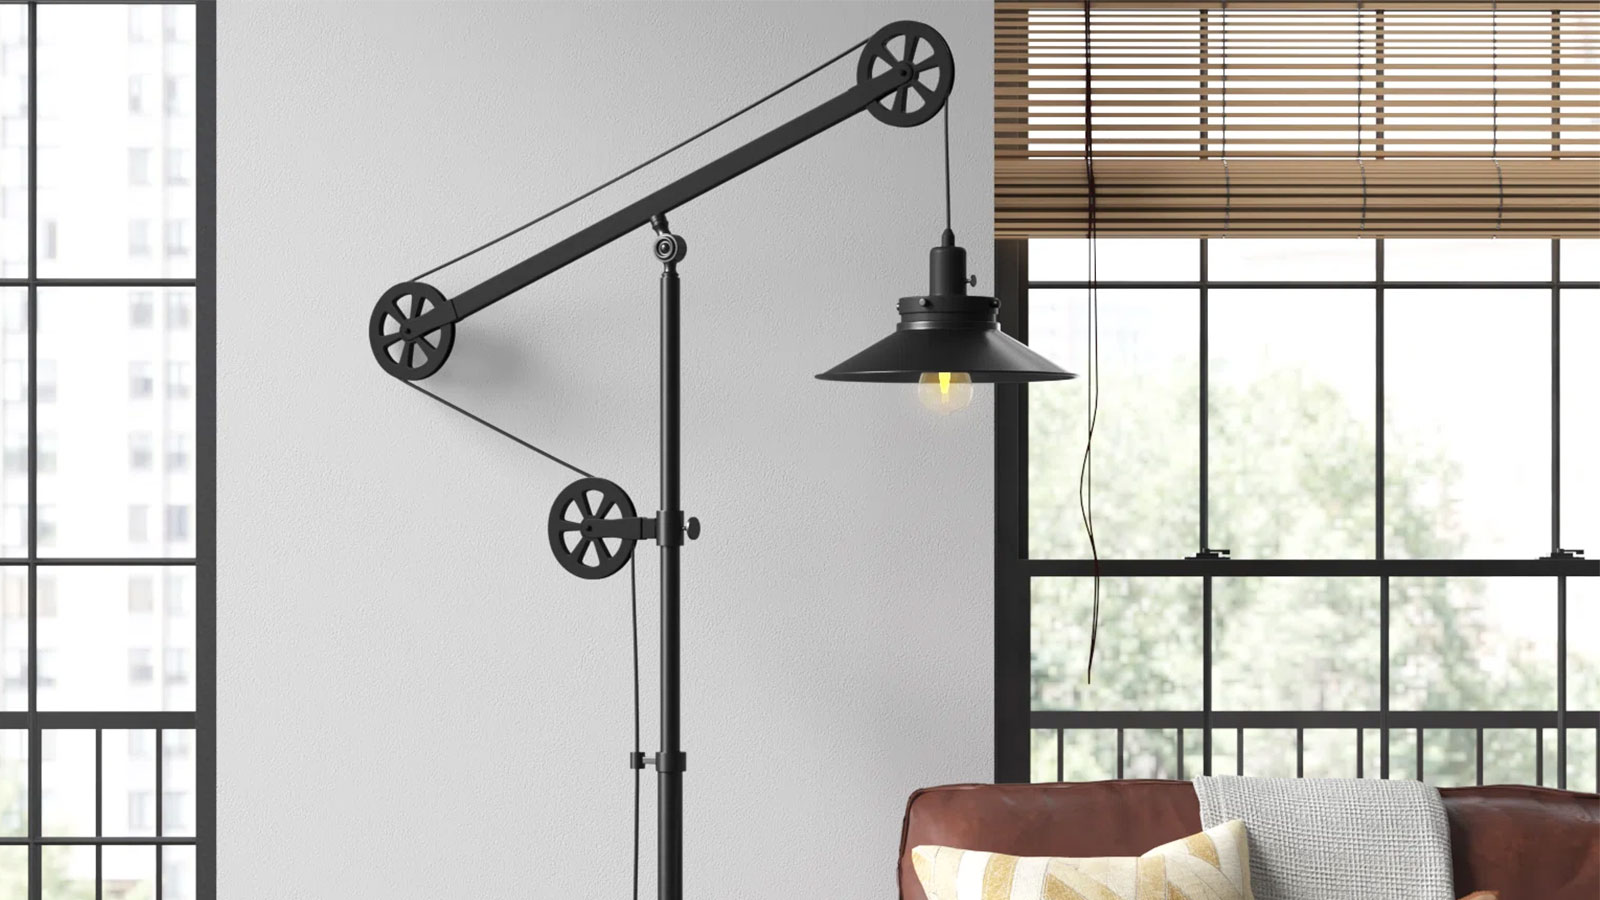 One of the best floor lamps in a room with windows. The lamp is on.